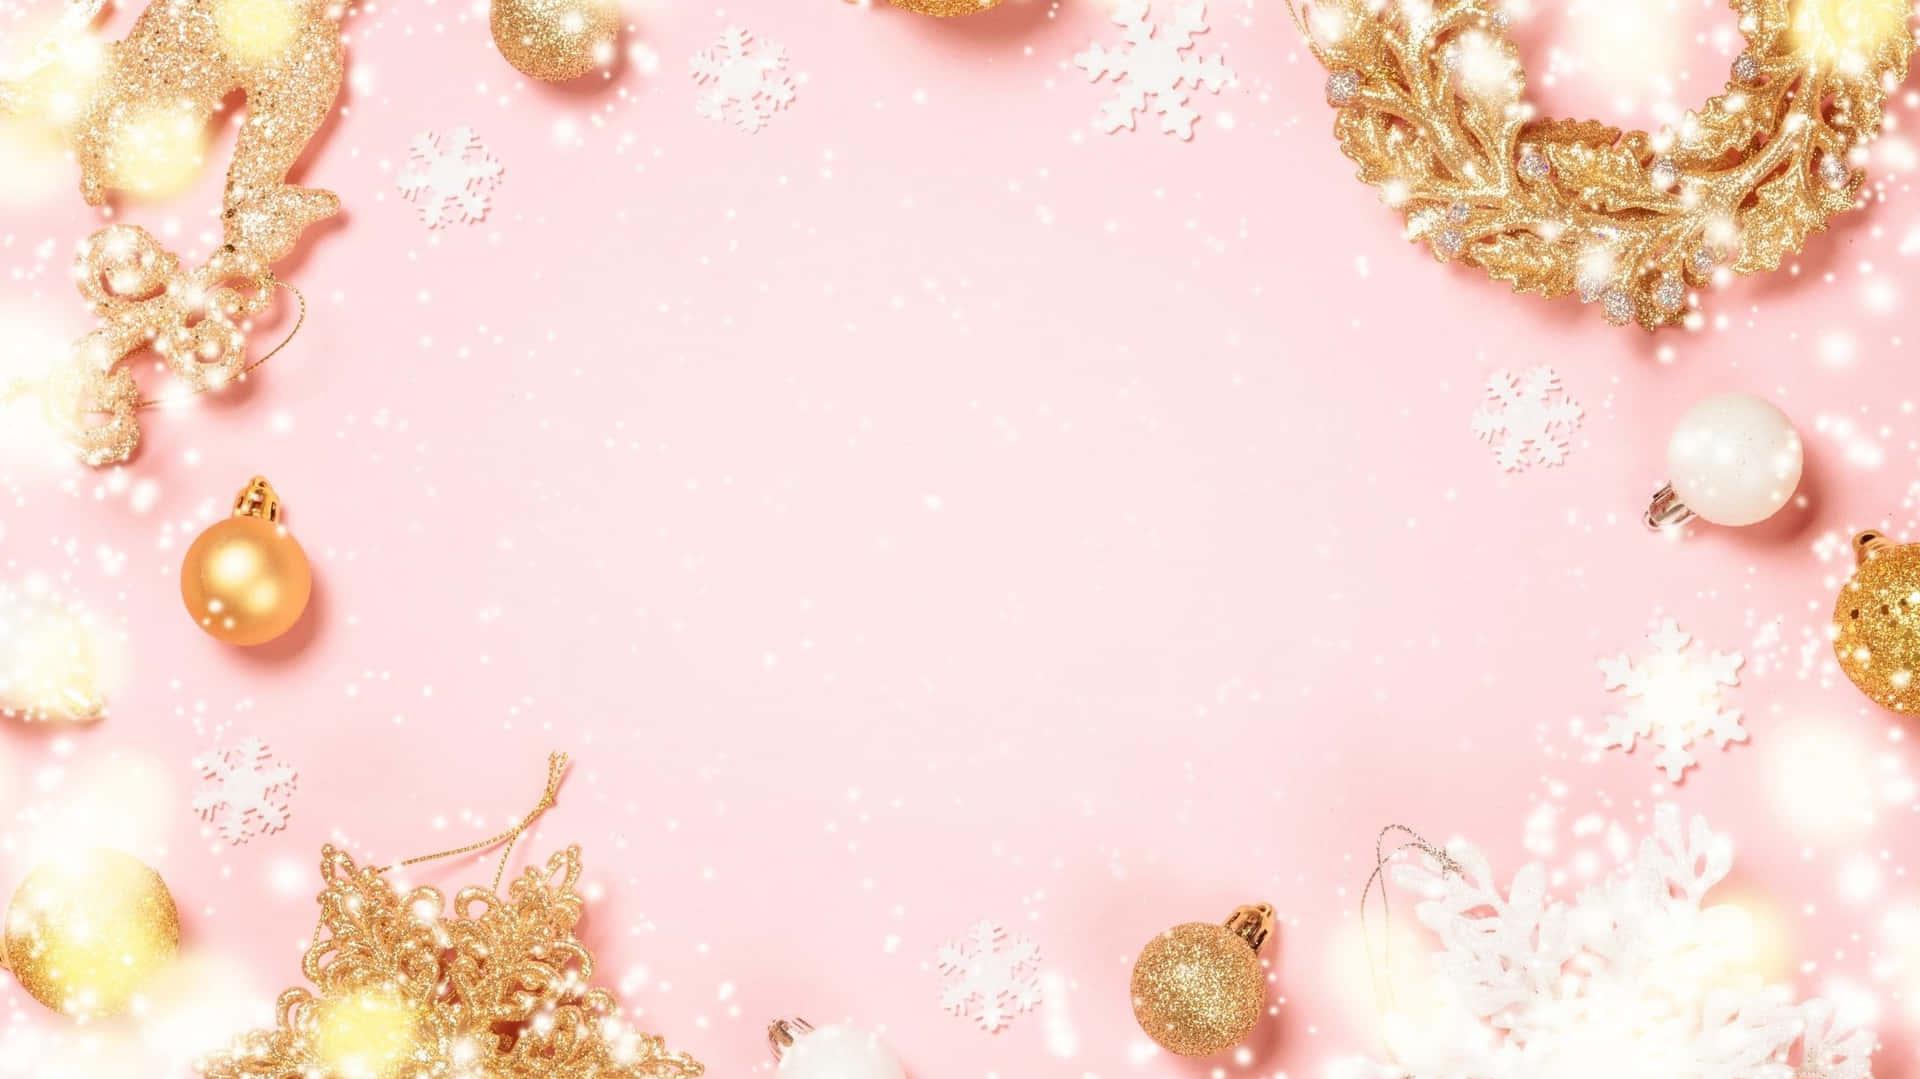 Christmas Background With Gold Decorations On Pink